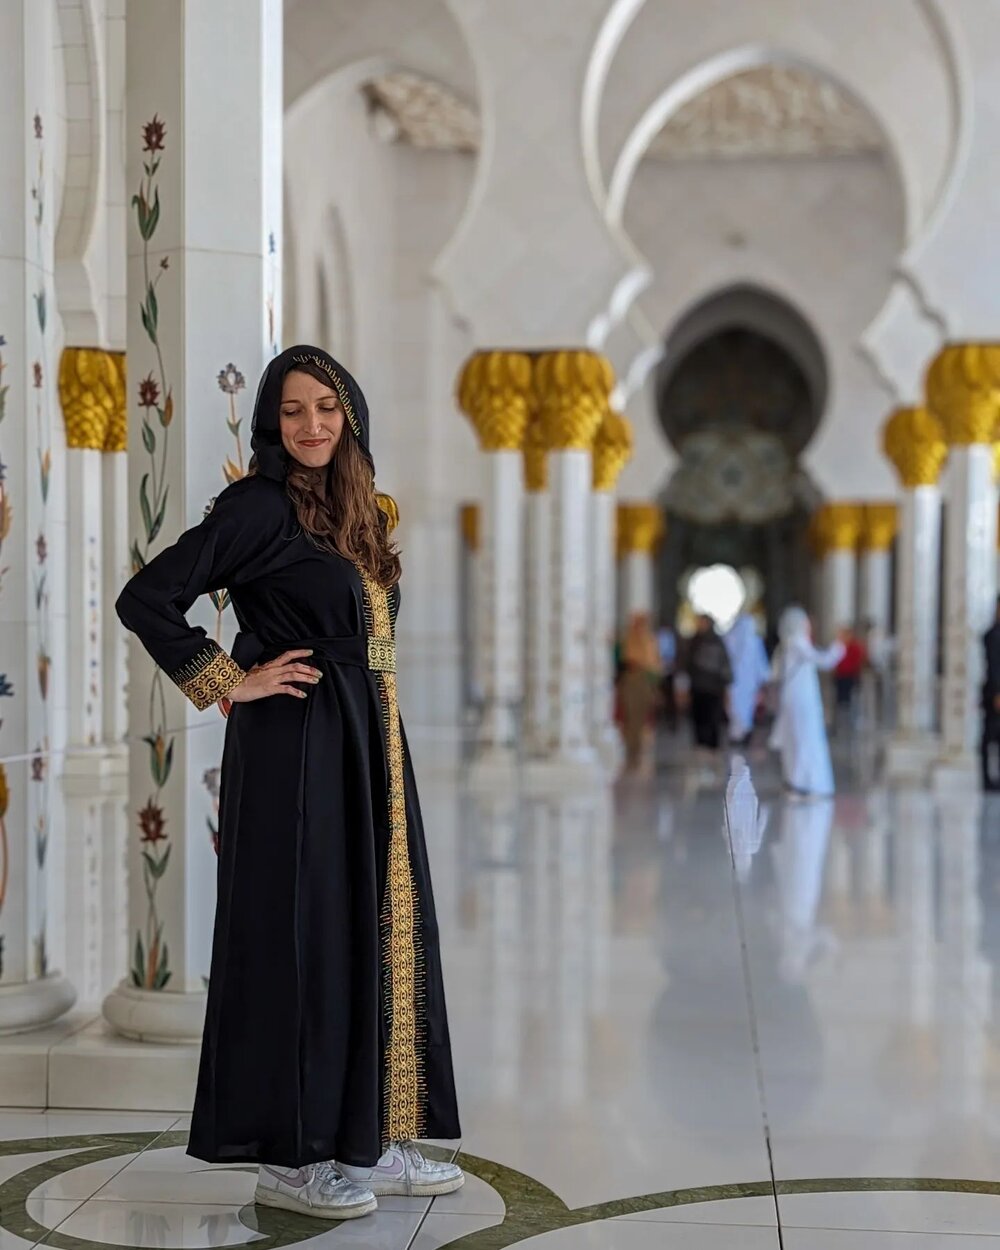 Just a princess in sneakers 💅👟

Any girls heading to Abu Dhabi should know a few things before going to Sheikh Zayed Grand Mosque. Many are tempted to buy an abaya - traditional dress - which I definitely encourage because they are beautiful!

But 